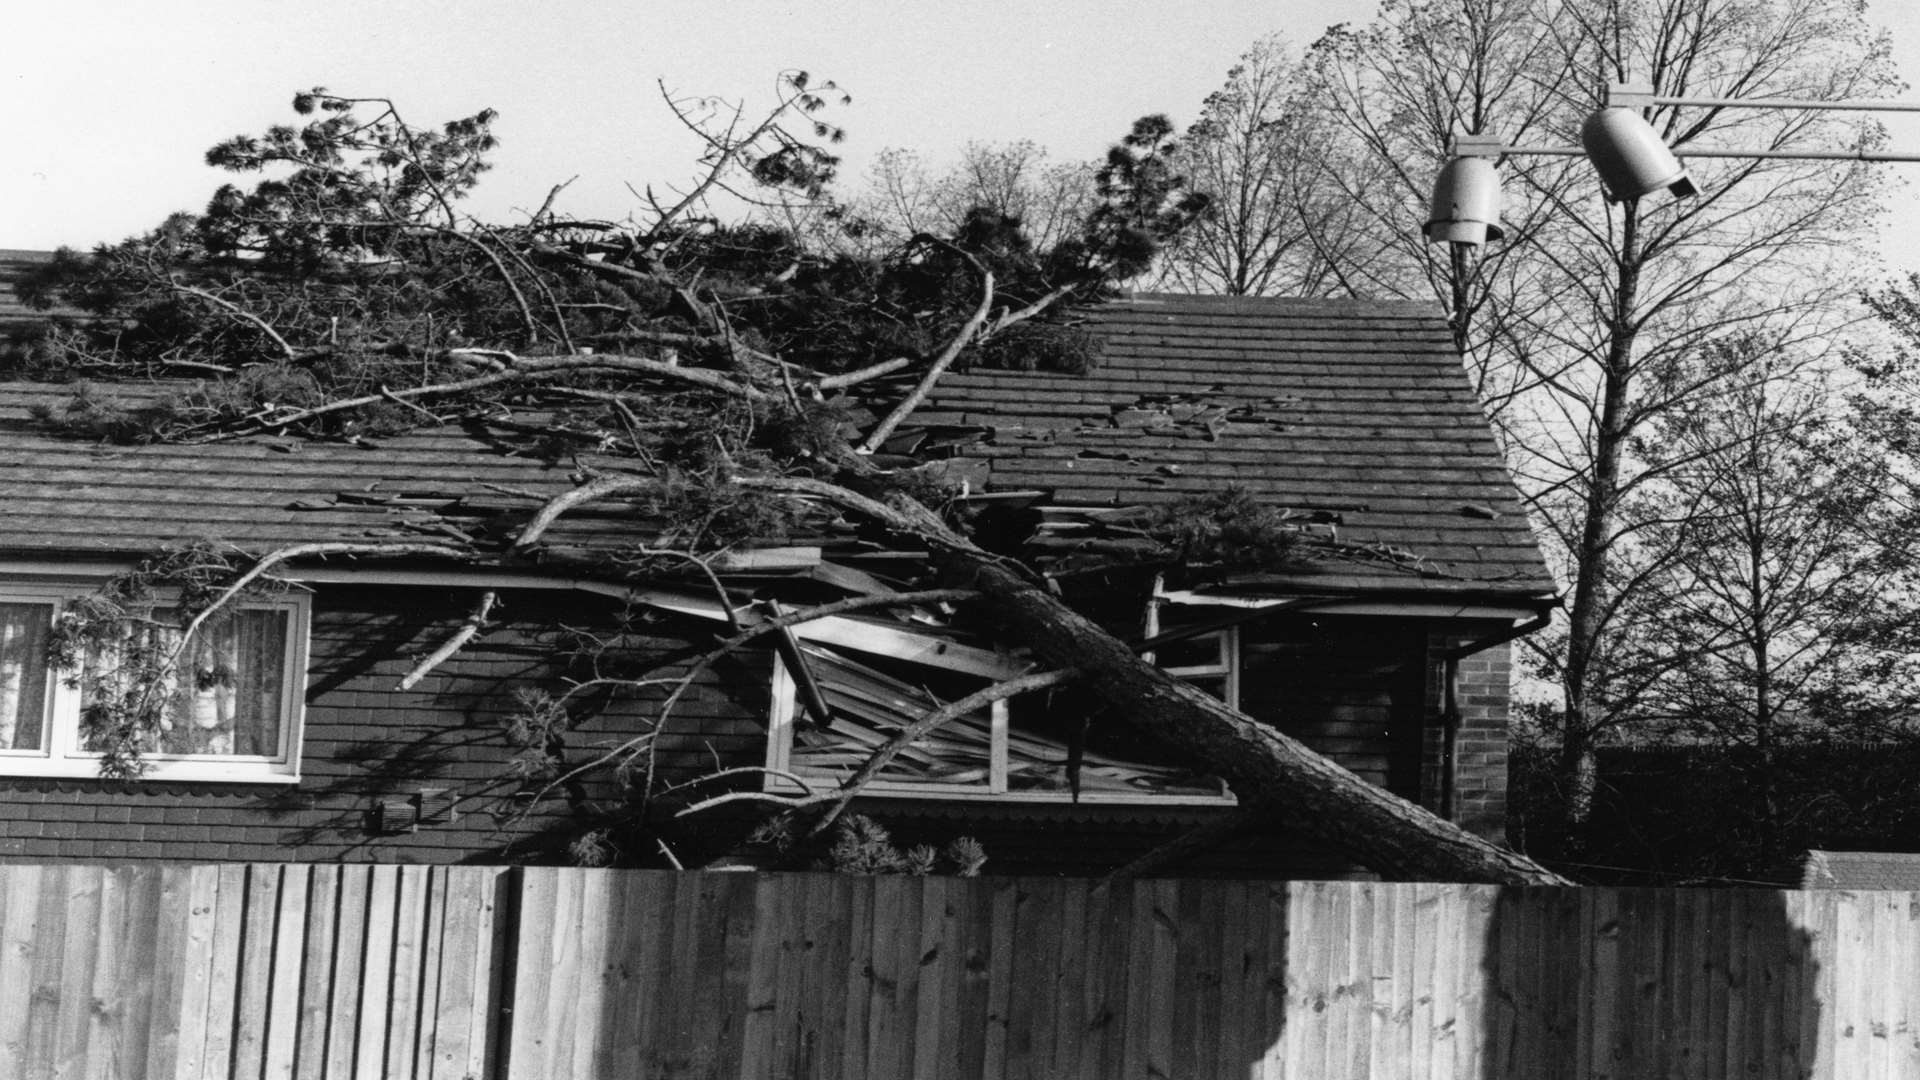 Damage caused by the Great Storm